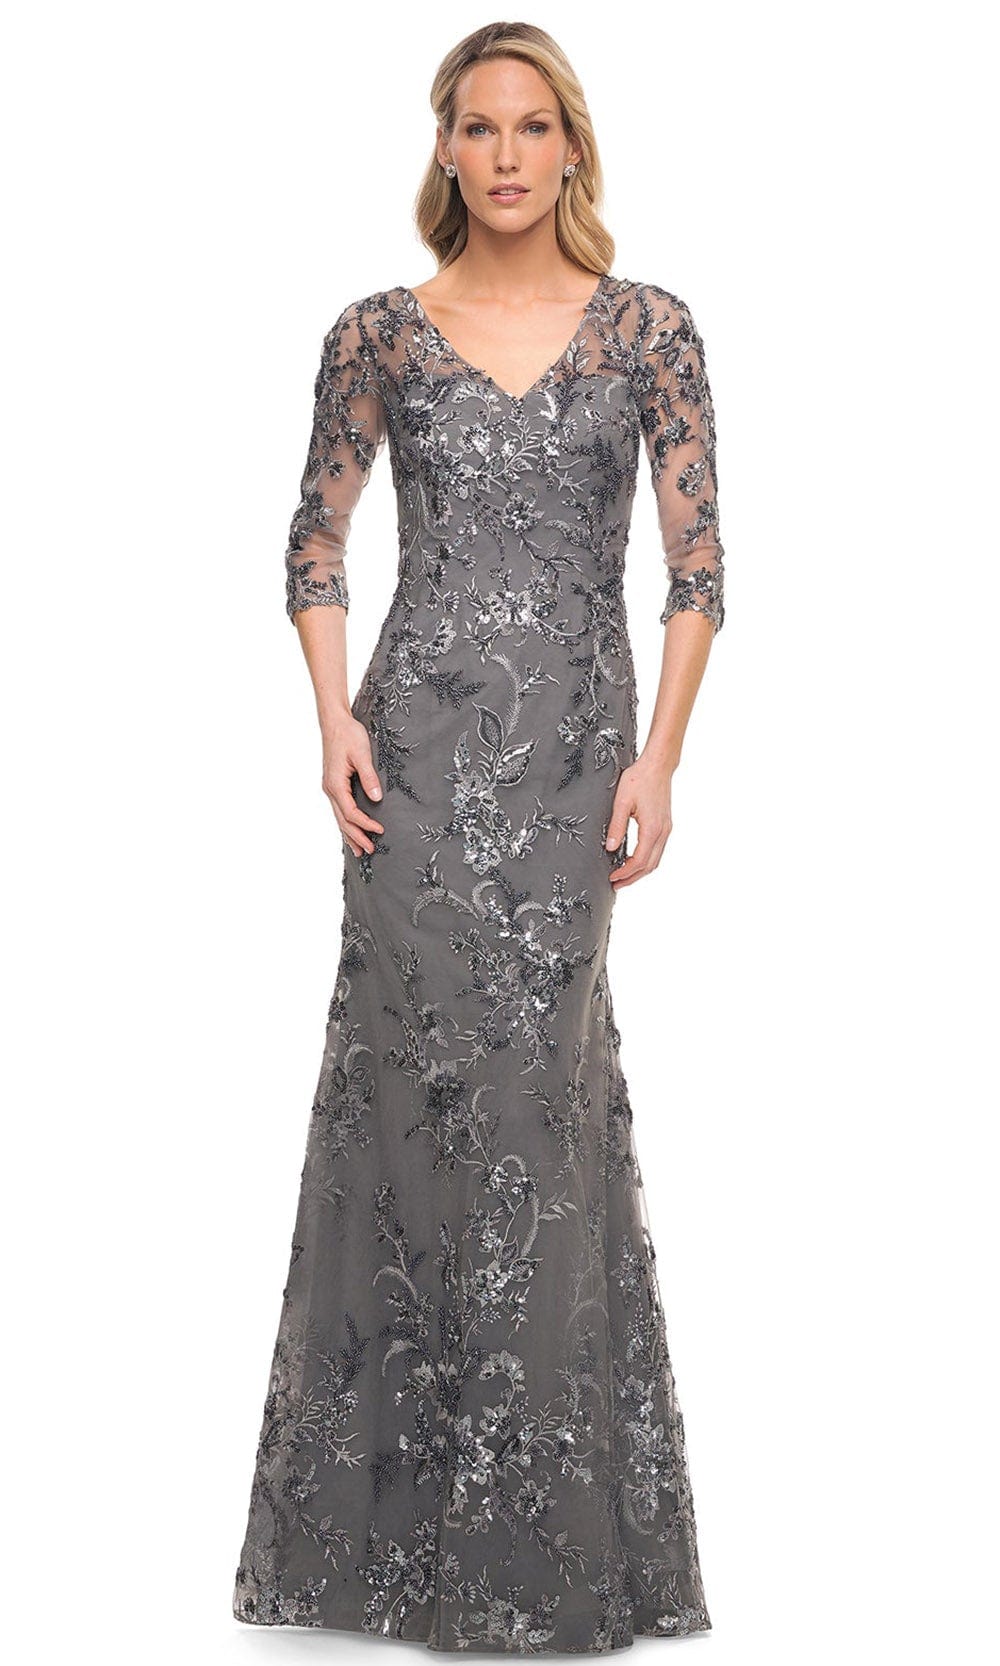 Image of La Femme 29976 - Embroidered Sheer Mother of the Groom Sheath Dress